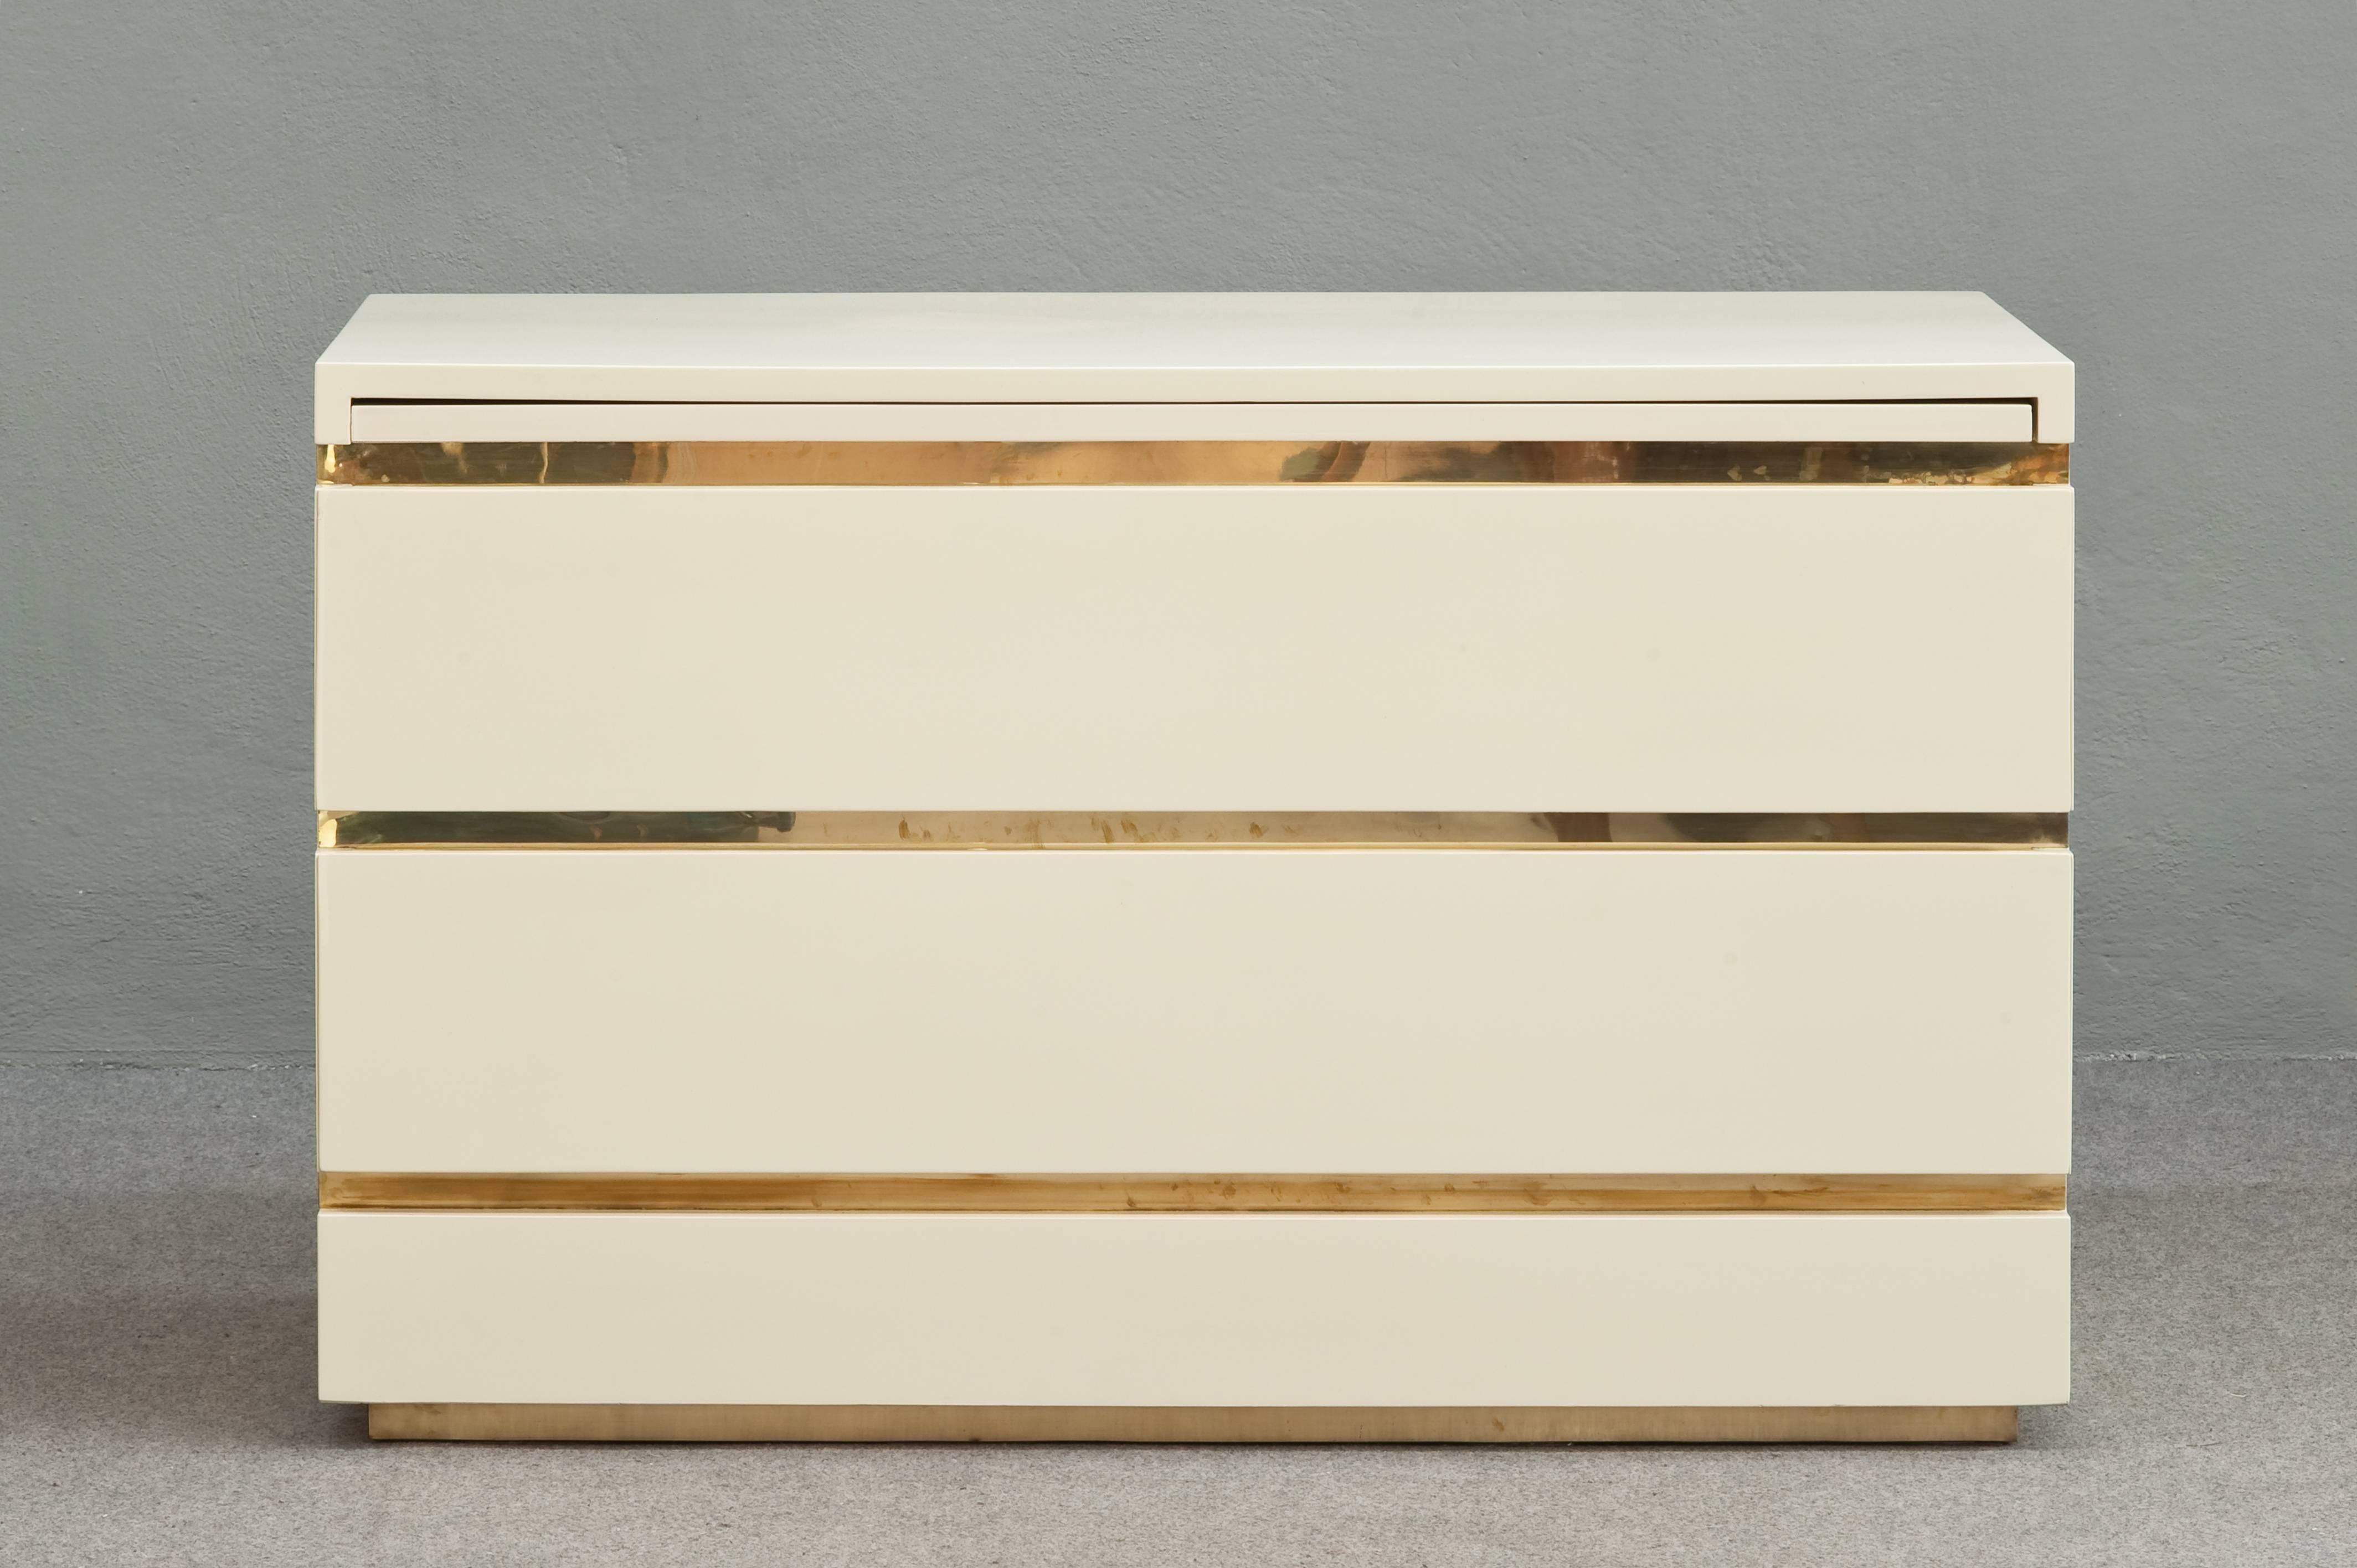 Elegant and rare chest of drawers designed by Gabriella Crespi.
Ivory lacquered wood with brass details. Signed and numbered (13).